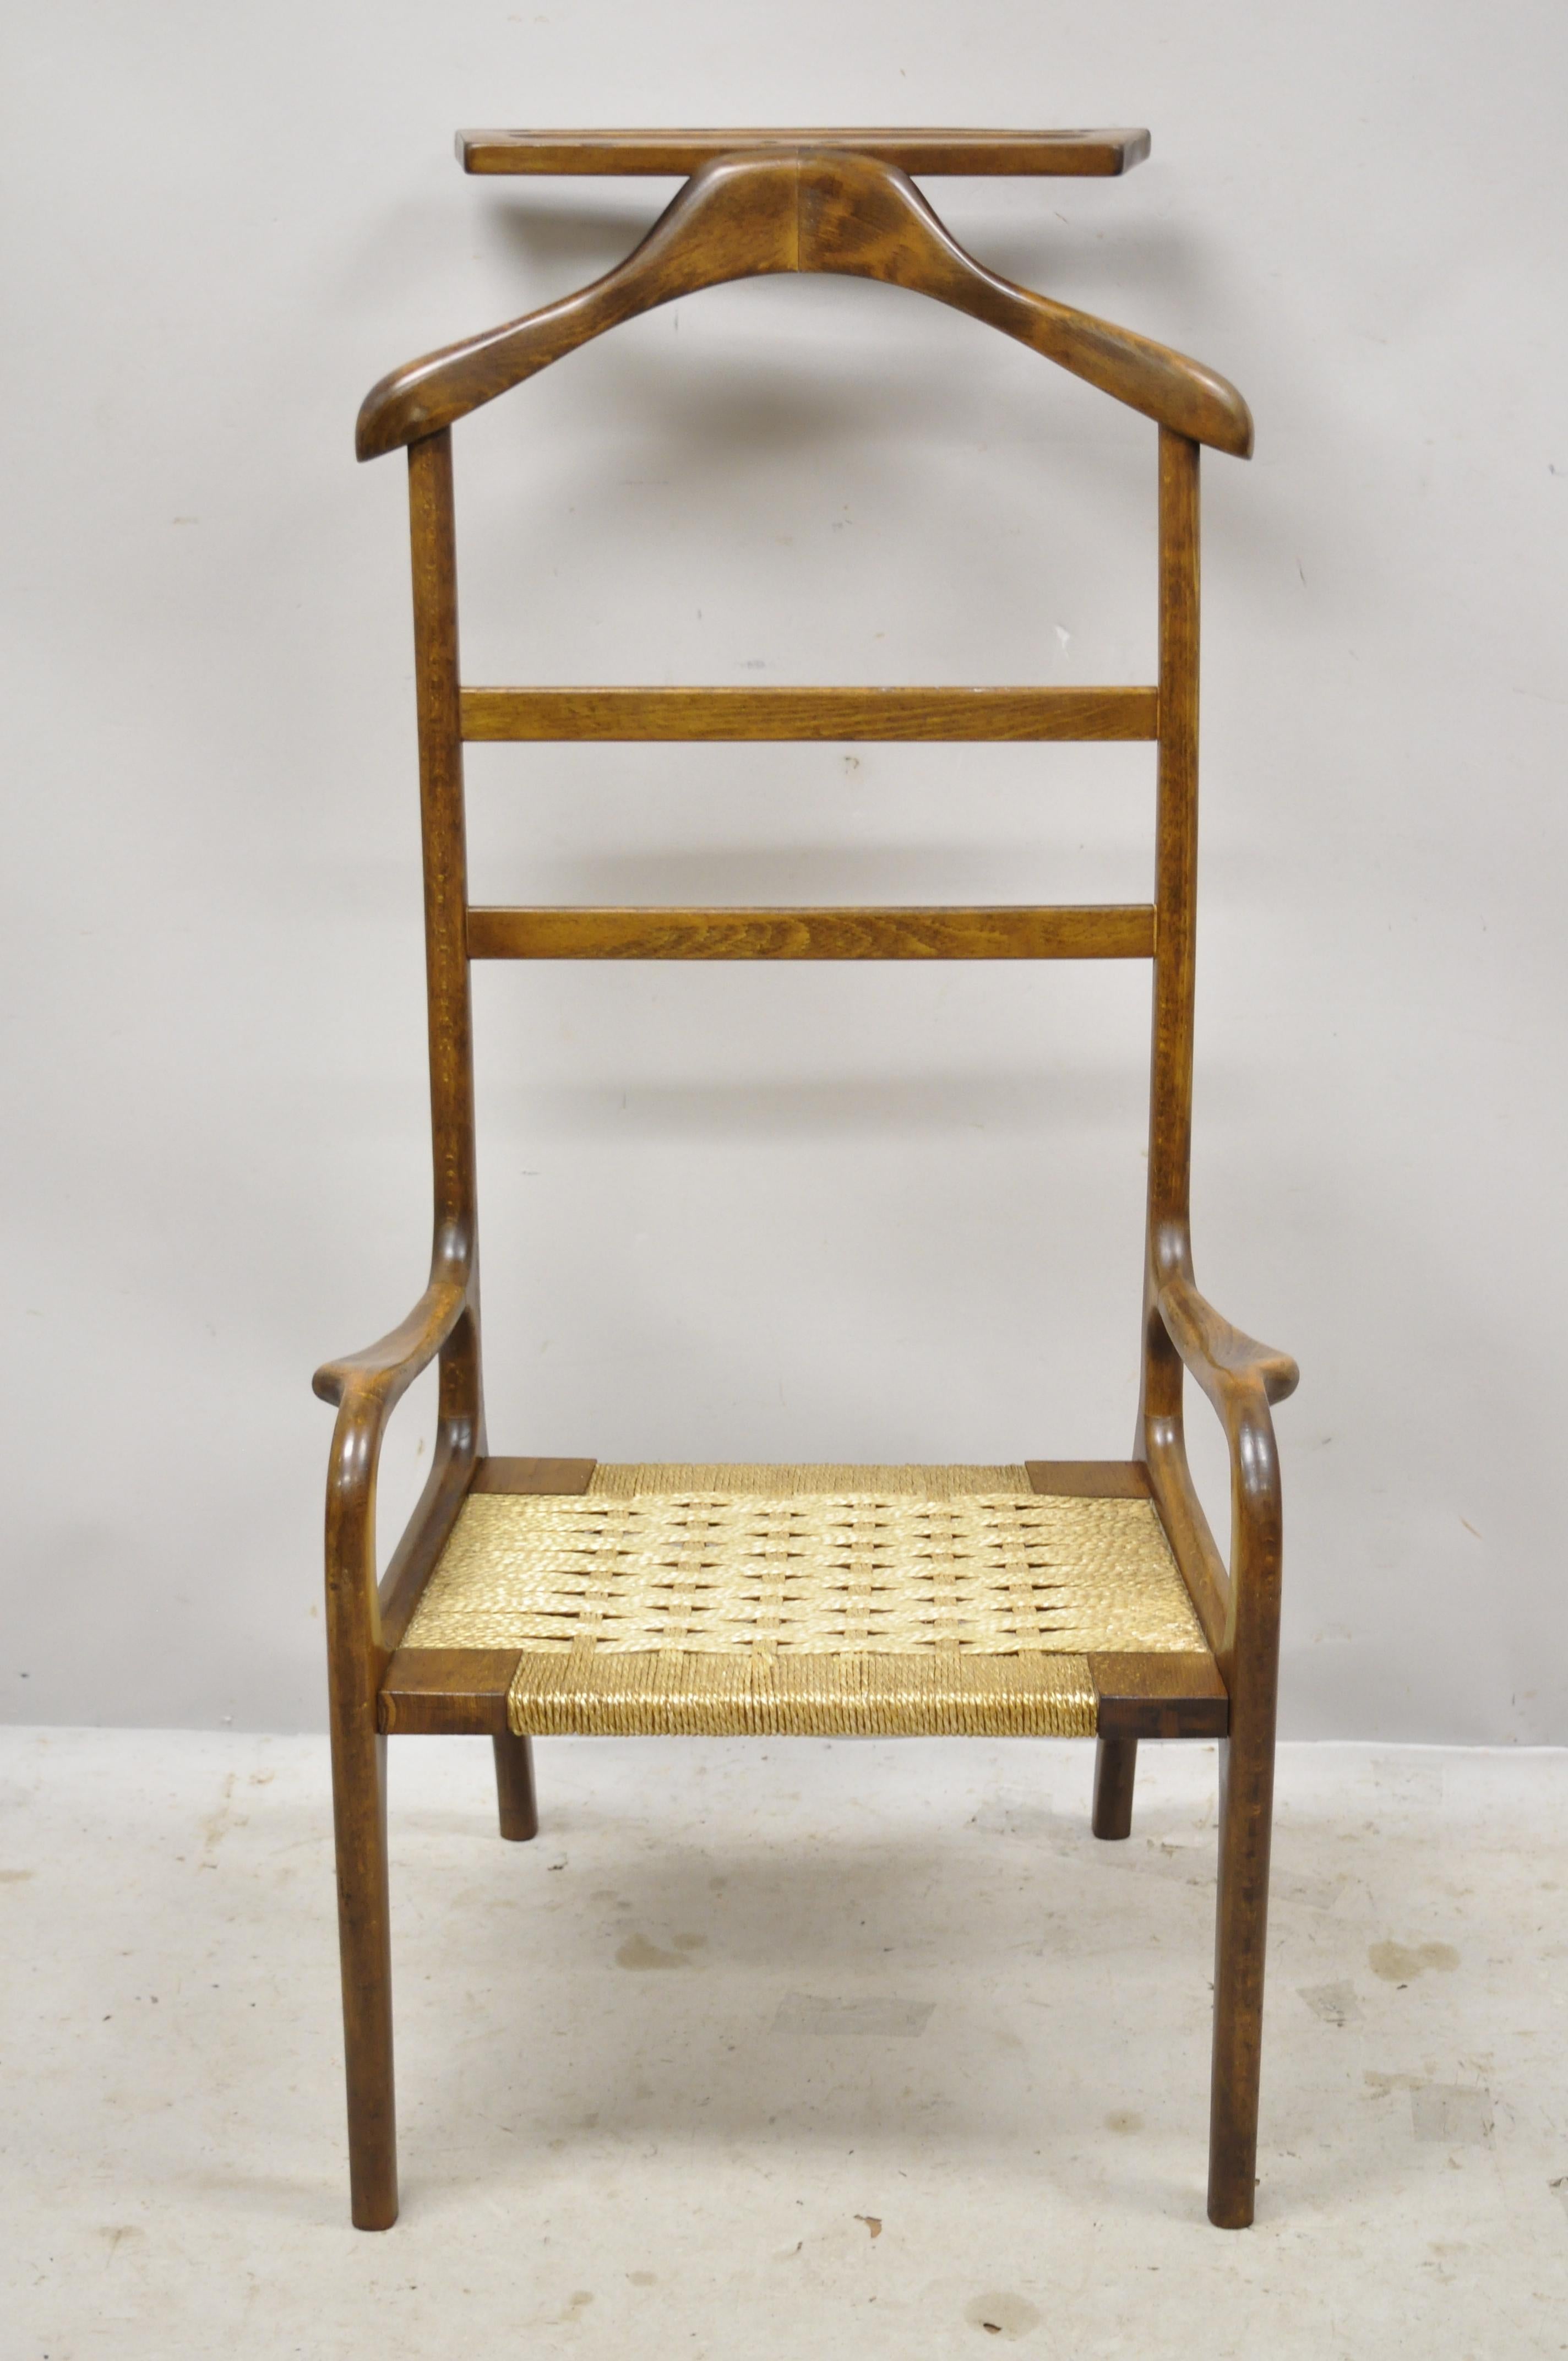 Mid-Century Modern sculptural wood clothing valet butler chair by Amcrest. Item features woven rope seat, beautiful wood grain, shapely saber legs, sleek sculptural form. Circa mid 20th century. Measurements: 44.5